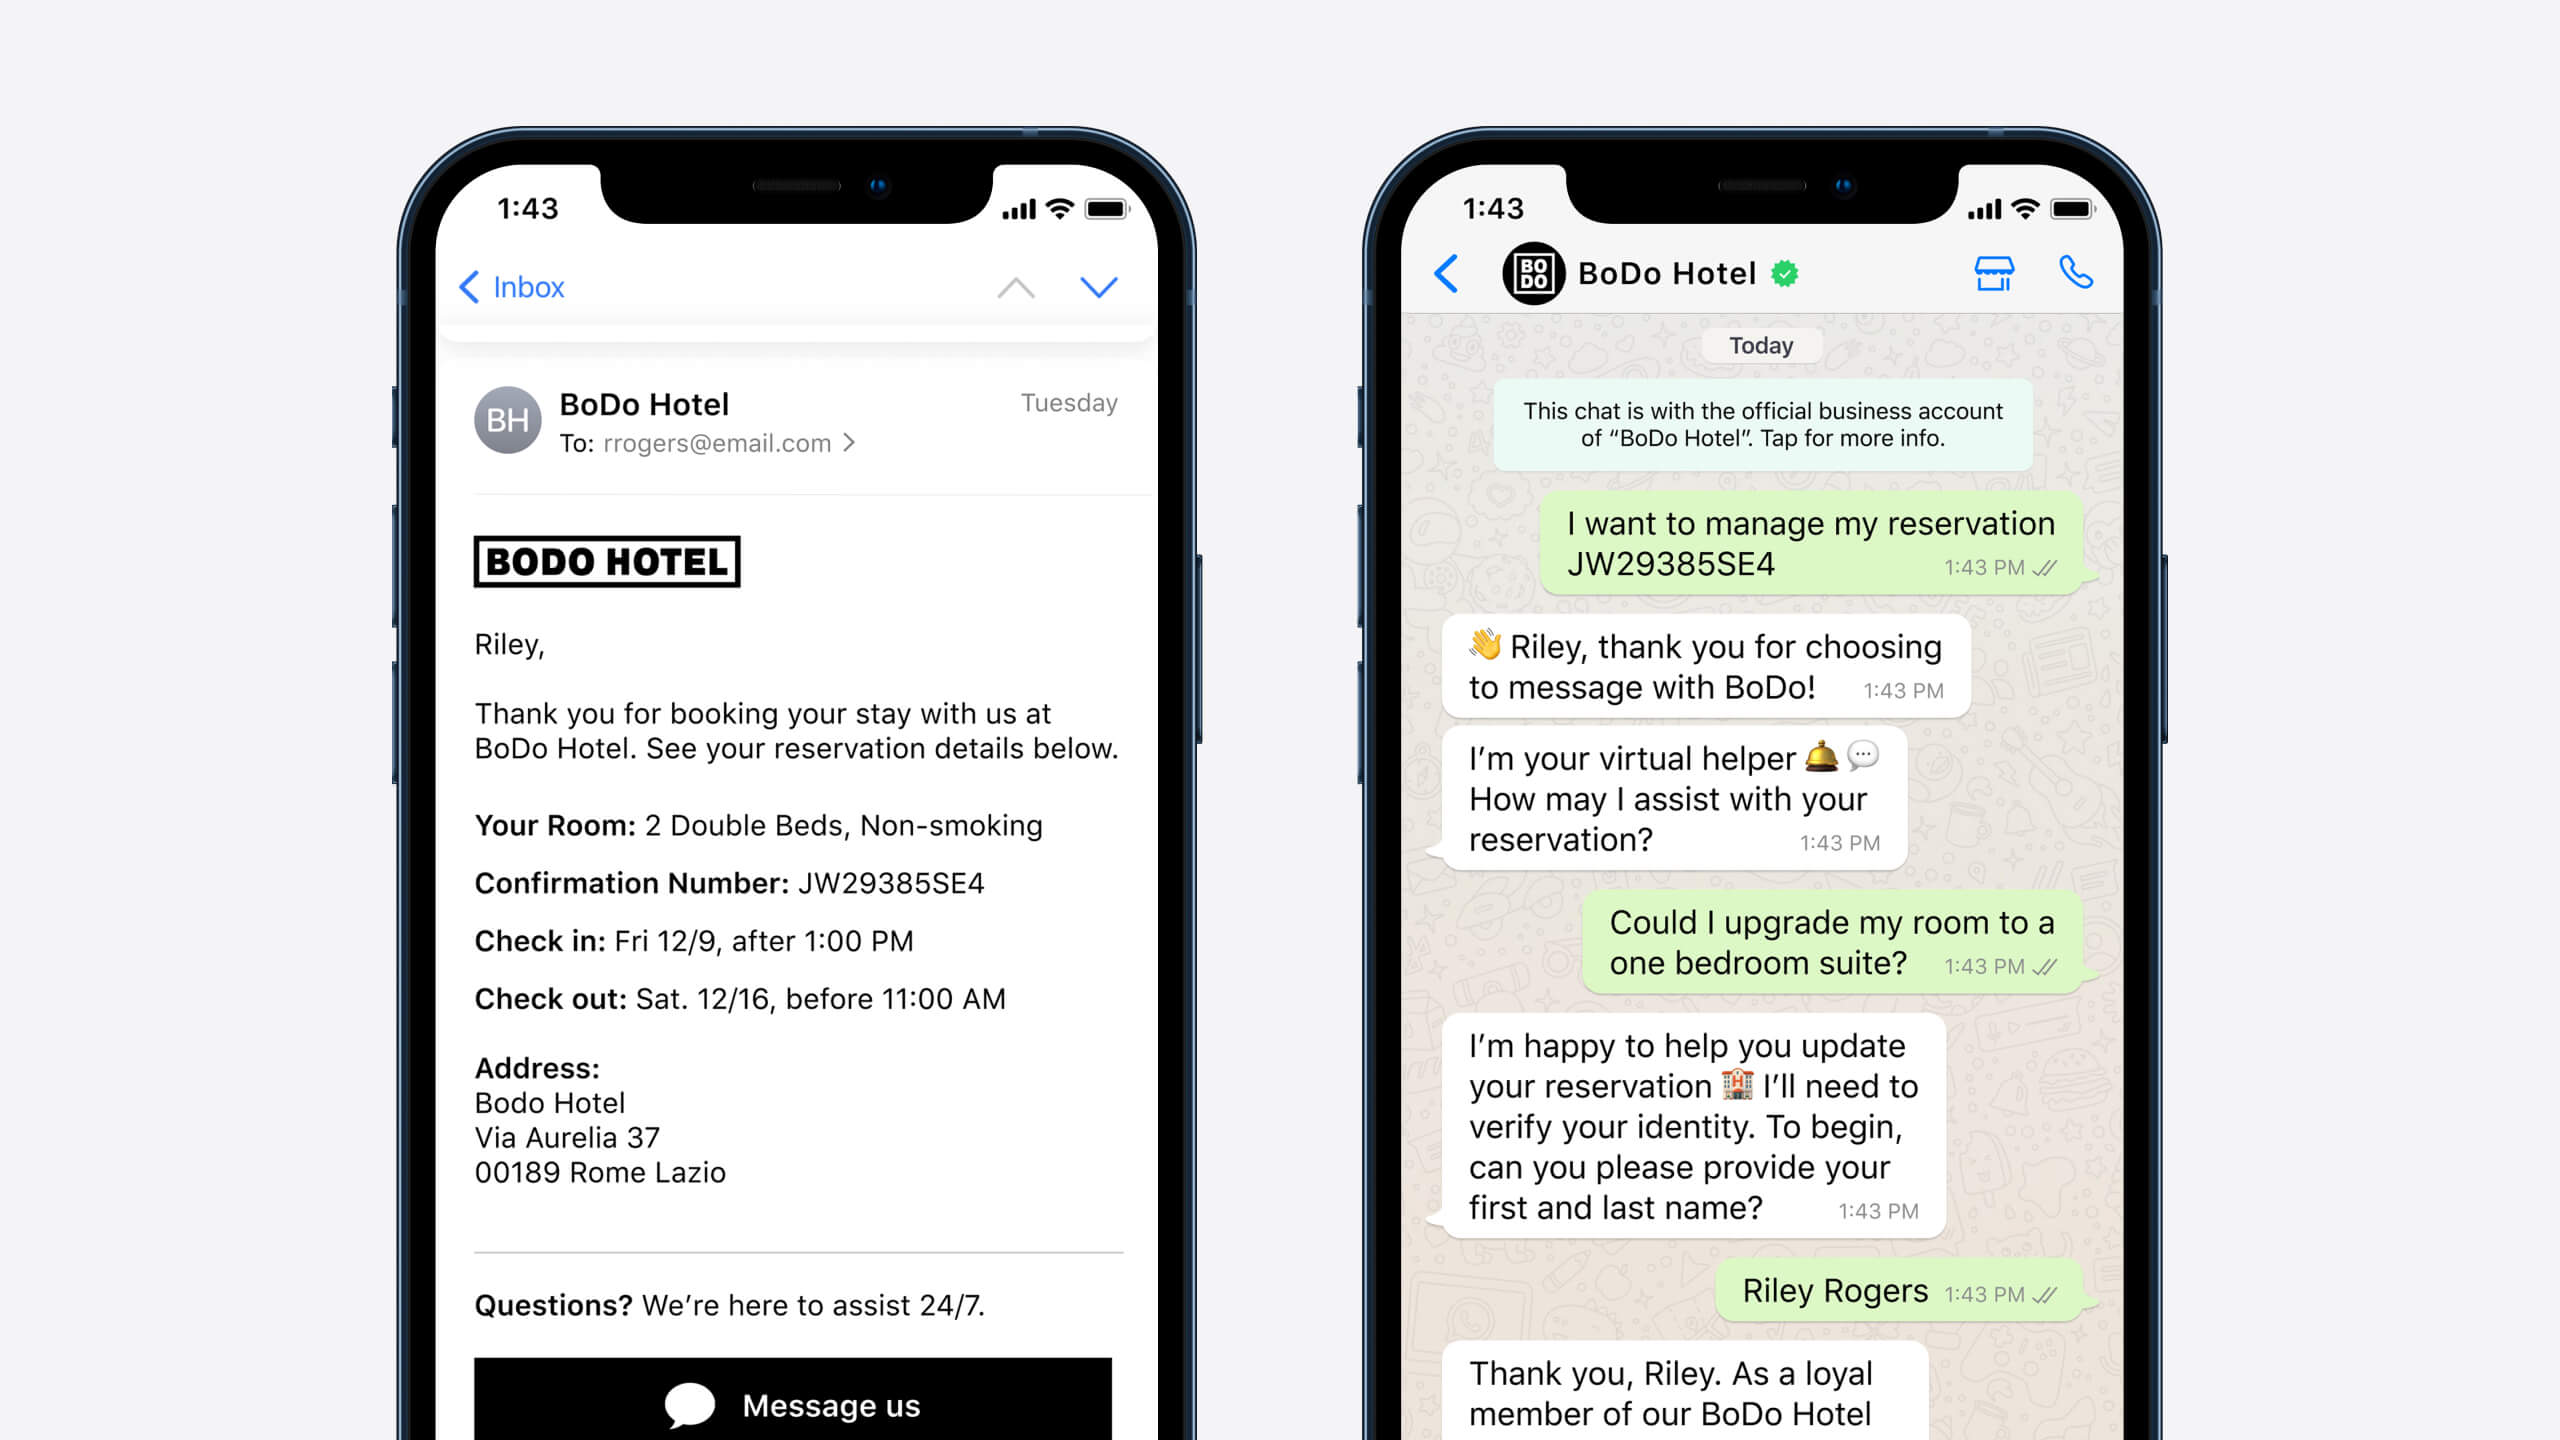 Hotel offers option to message and is able to deflect calls and emails for messaging, making it easier for support agents to assist